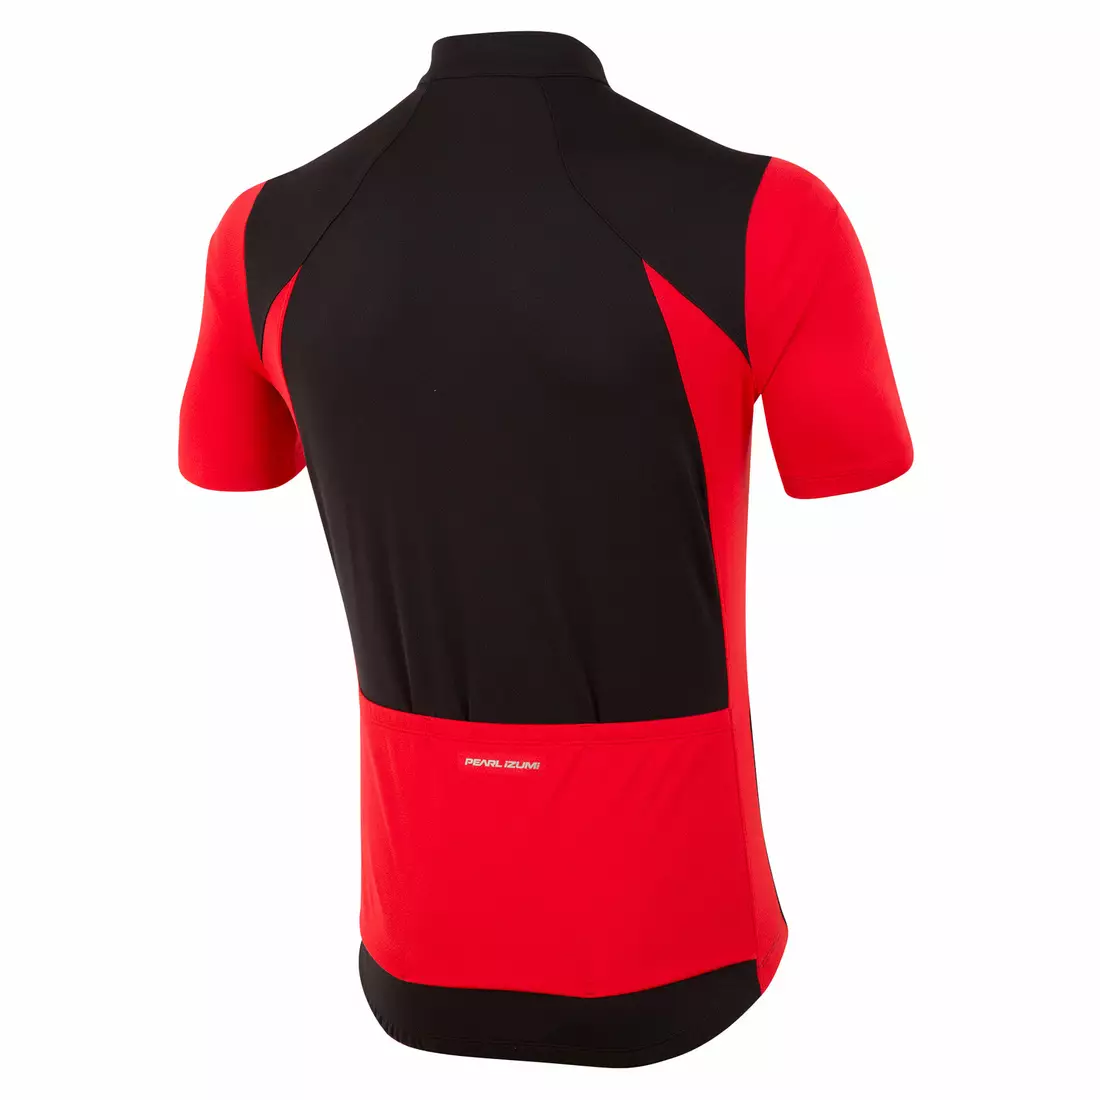 PEARL IZUMI SELECT cycling jersey 11121608-2FK black and red